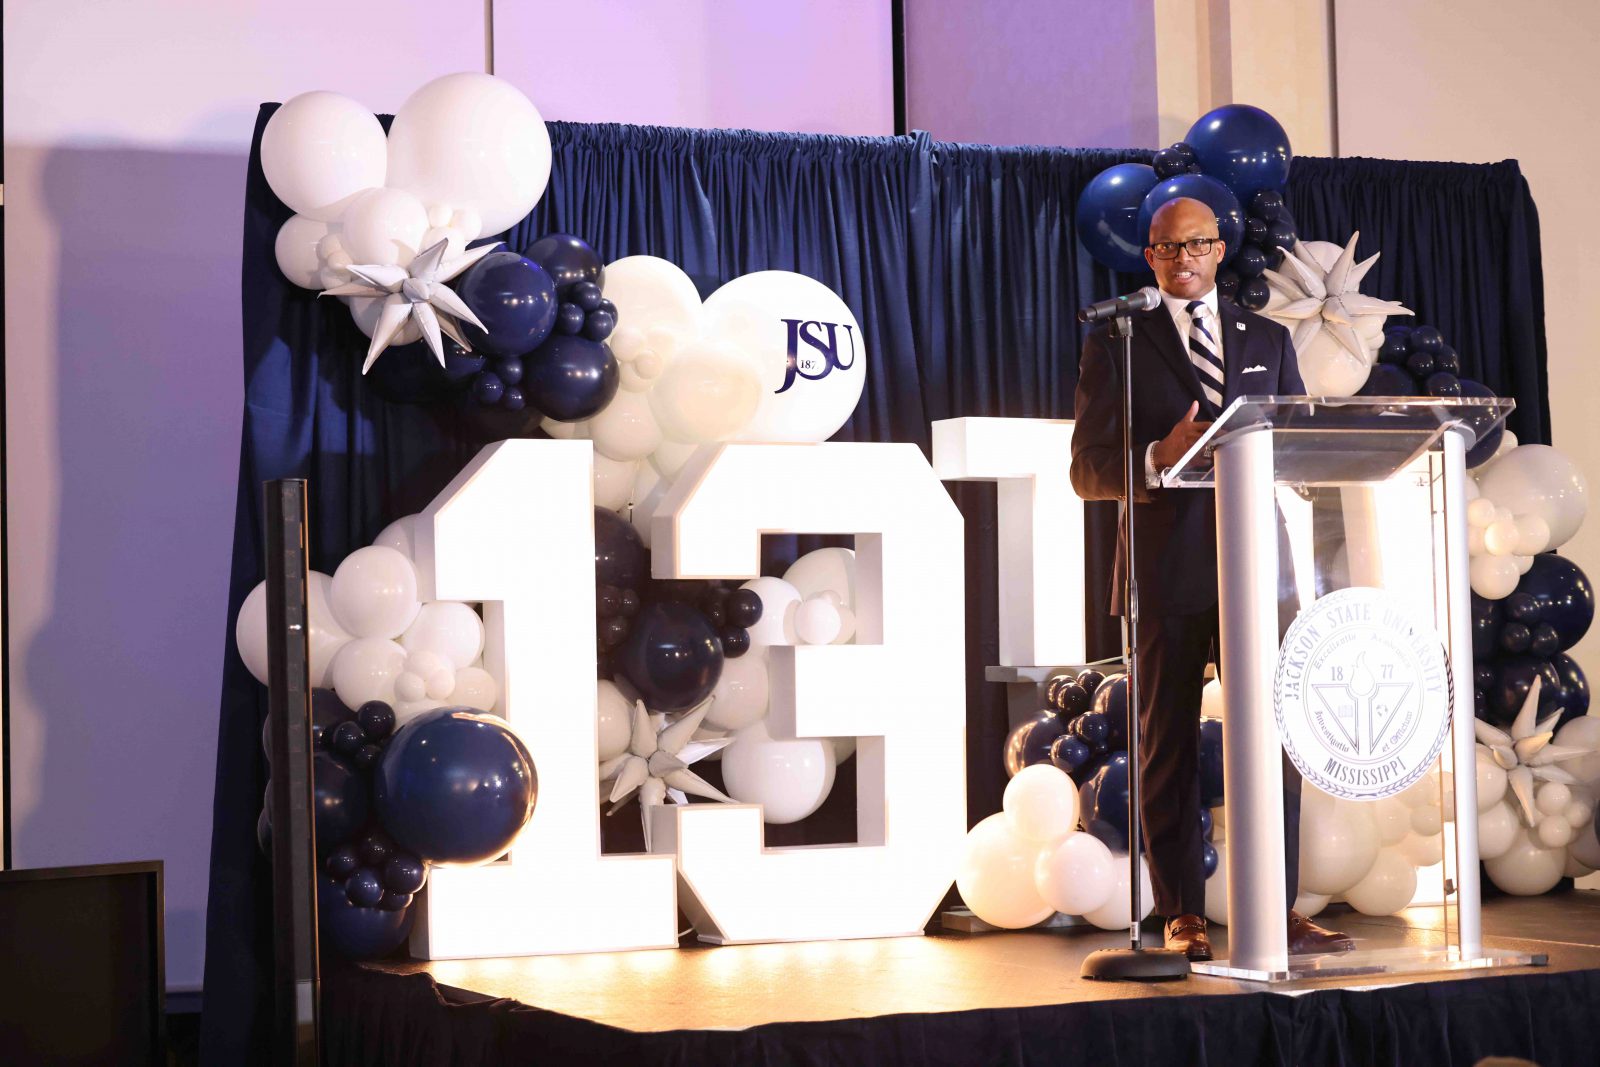 JSU welcomes nearly 600 guests to new president’s meet and greet, Thompson talks shared vision